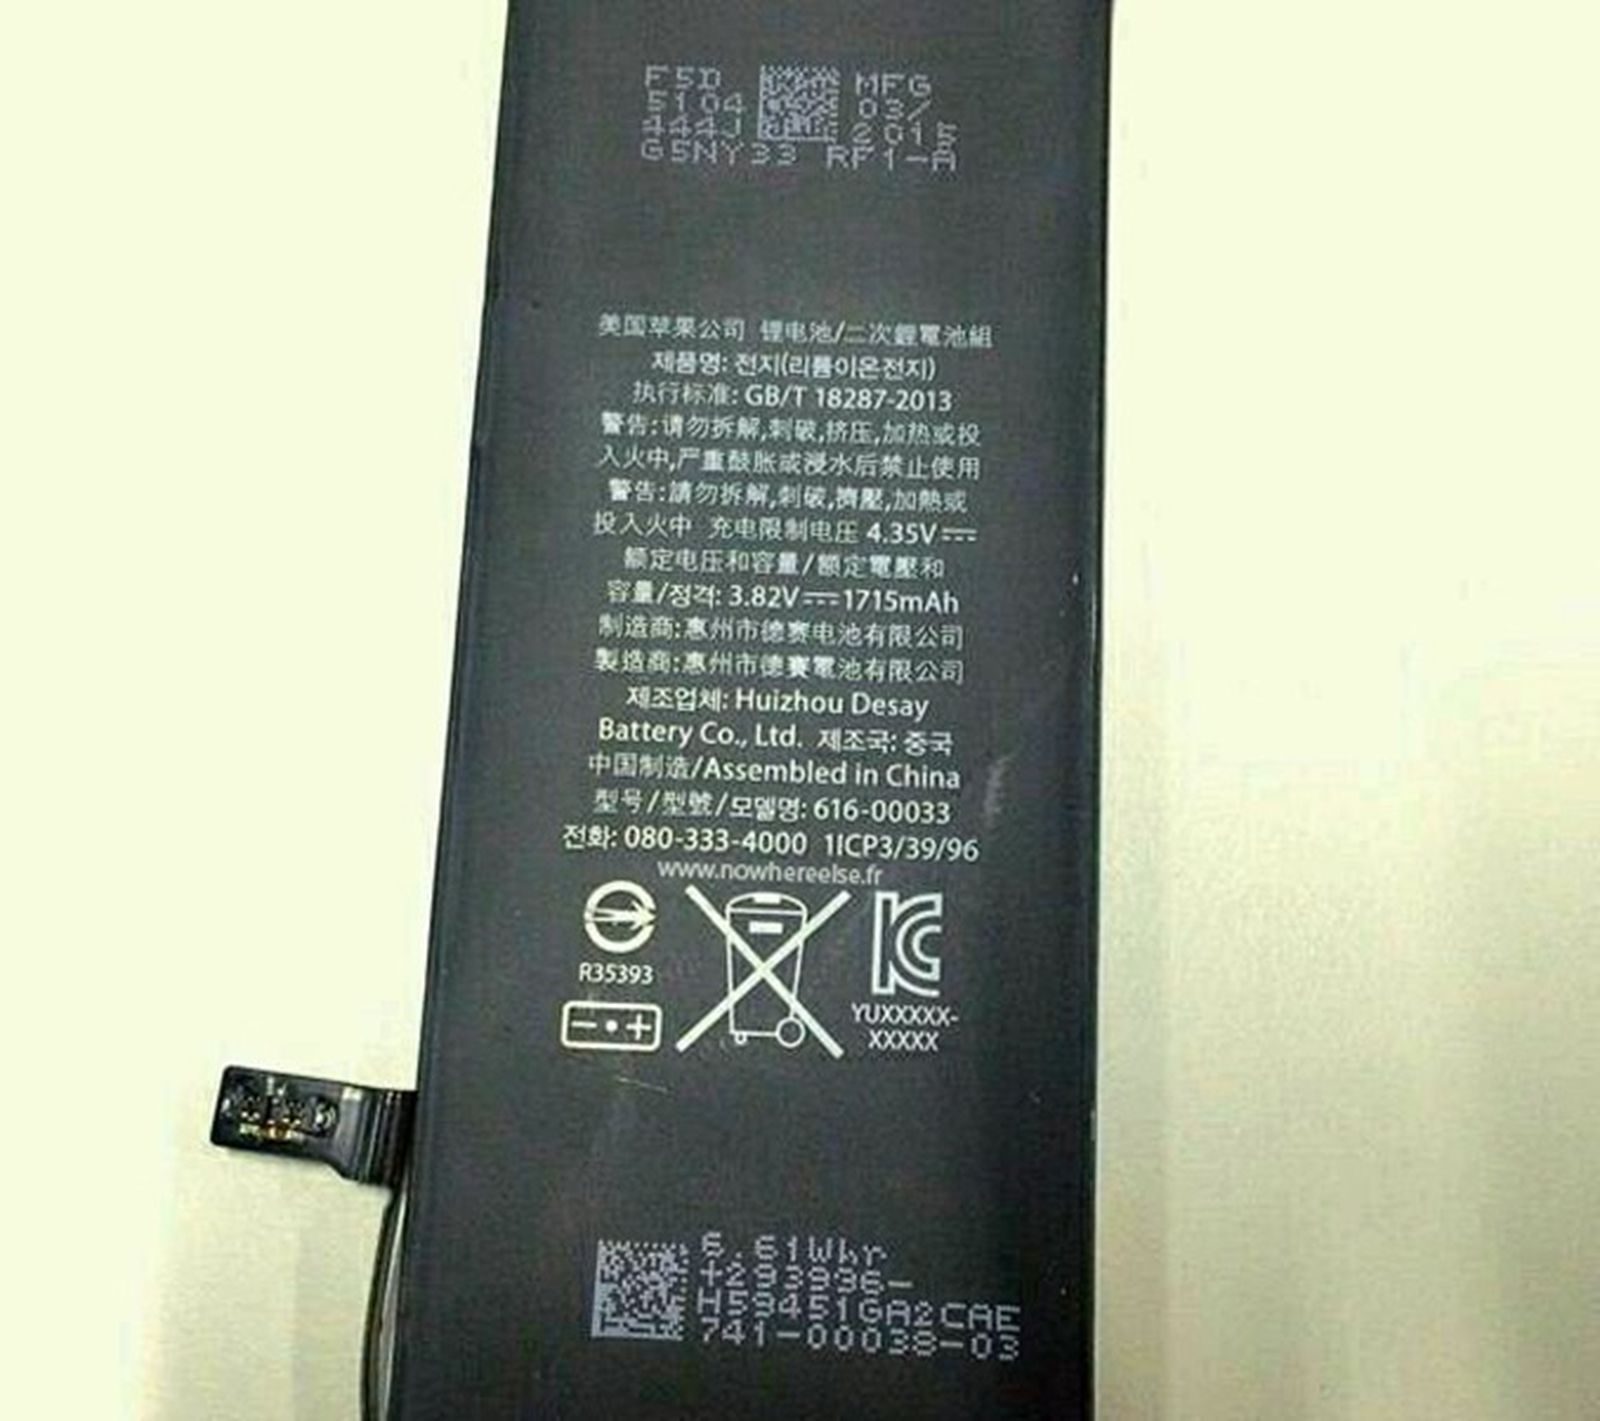 Forblive uren Og iPhone Battery With 1715 mAh Capacity Possibly Destined for 'iPhone 6s' or  '6c' Appears - MacRumors